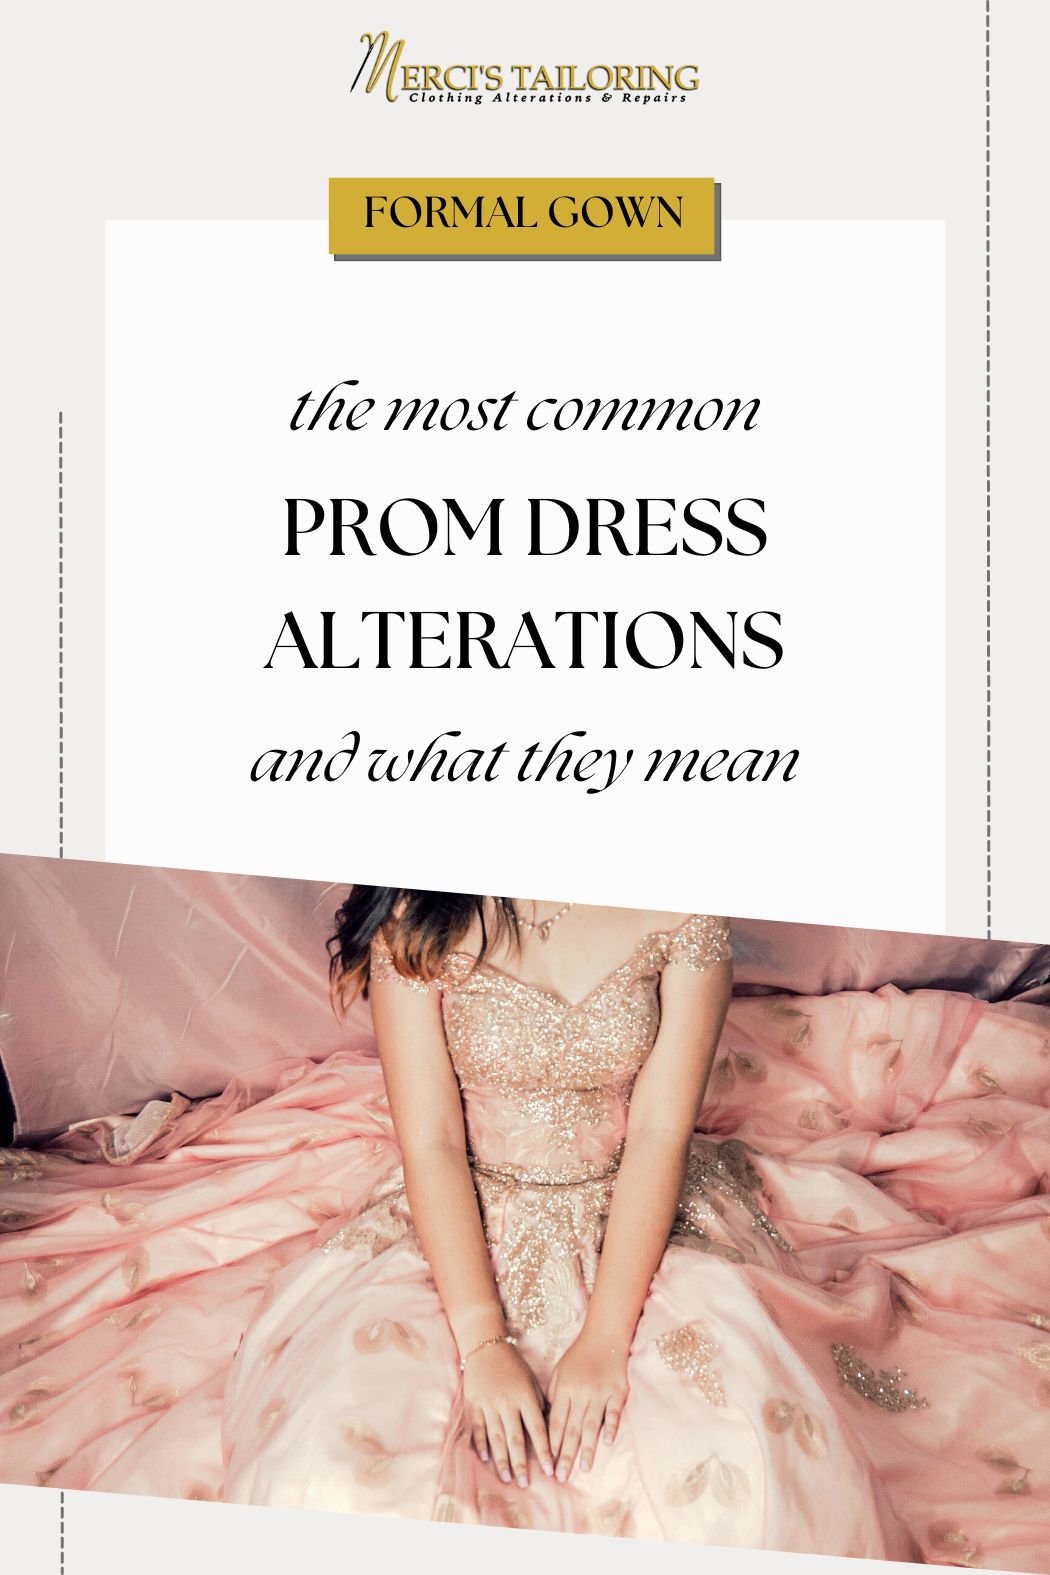 The Most Common Prom Dress Alterations and What They Mean